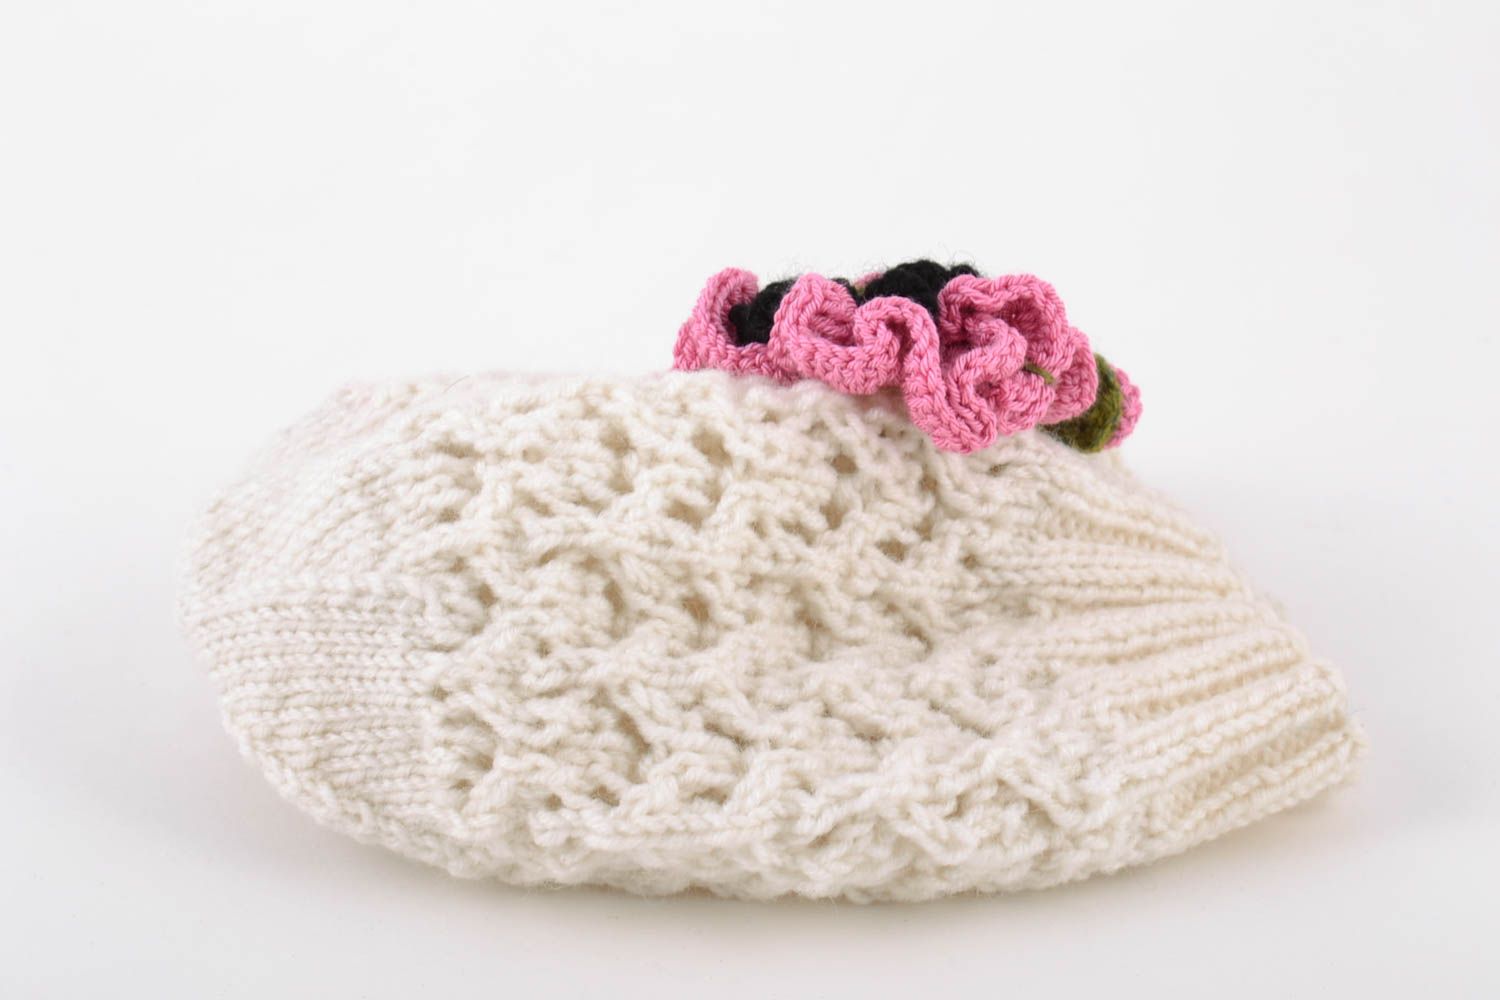 Handmade demi seasonal lacy baby hat crocheted of white cotton threads with flower photo 4